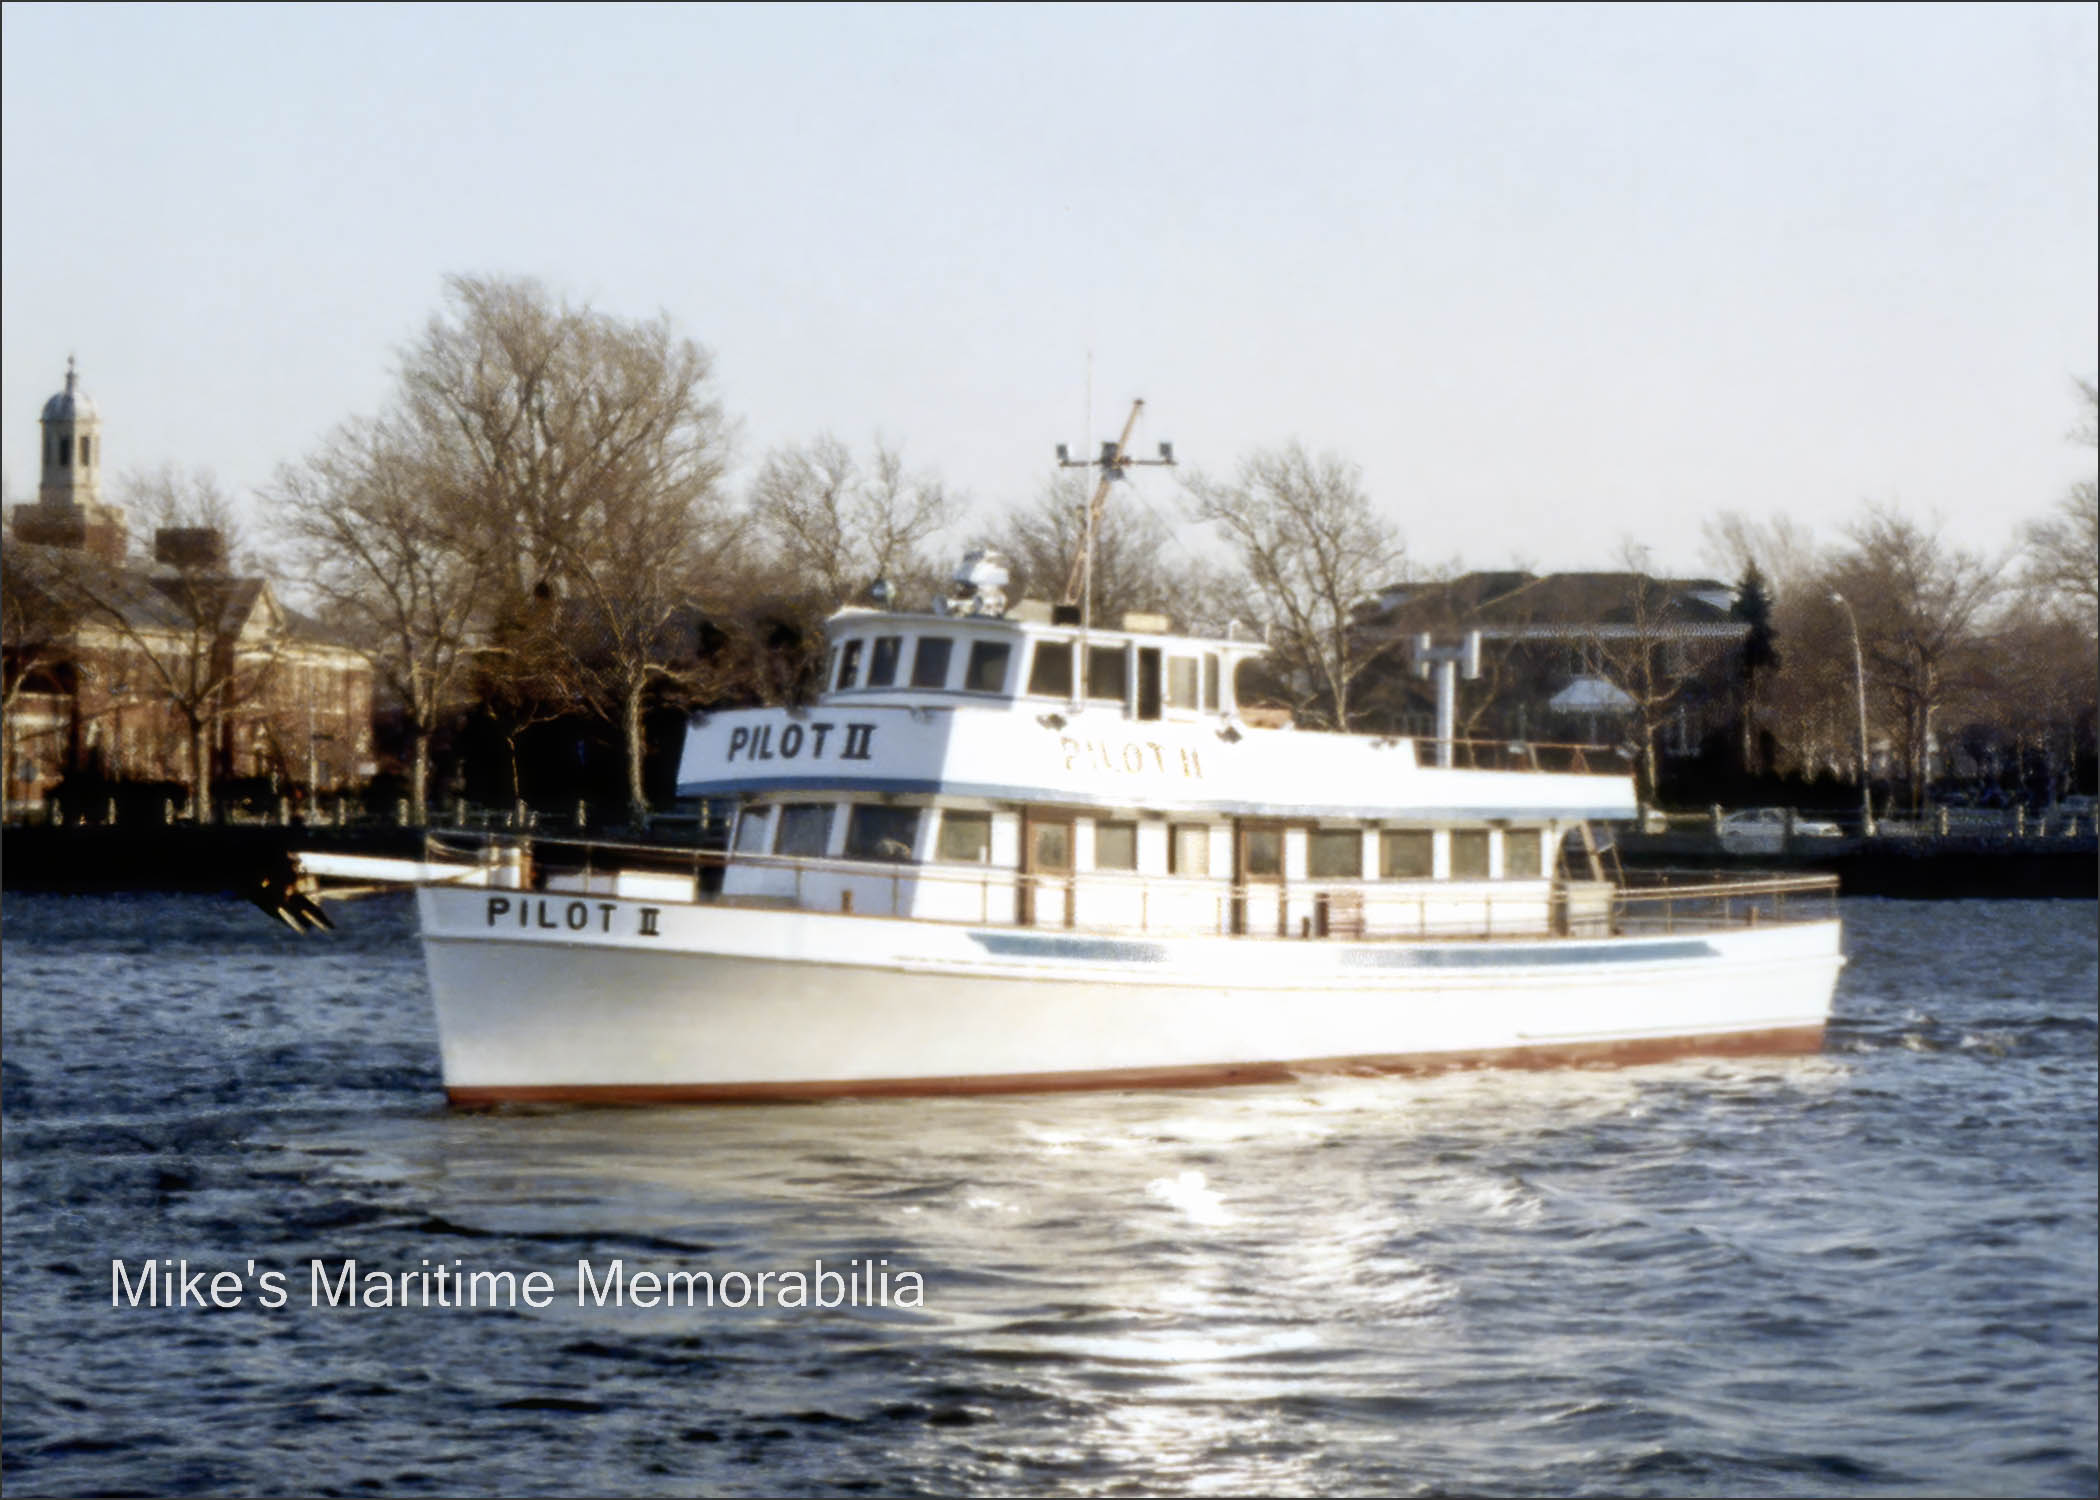 PILOT II, Brooklyn, NY – 1980 Captain Tommy Marconi's "PILOT II" from Sheepshead Bay, Brooklyn, NY circa 1983. She was built in 1964 by Gillikin Boat Works at Harkers Island, NC as Captain Stanley Joseph's "CAPT. JOSEPH II" from Captree, NY. She was originally powered by four GM 6-71 diesel engines turning three propellers (two engines were connected in tandem to the center propeller shaft), and was later modified to operate with three engines. During her tenure at Sheepshead Bay, she was considered THE Blackfish party boat. This photo was taken on March 5, 1985 by Sheepshead Bay photographer Harry Ostrow as the PILOT II returned from her annual trip to the shipyard. Sadly, there was an electrical fire during a Flounder fishing trip on the very next day and the "PILOT II" burned to the waterline and was beached at Sandy Hook. This is the very last photo taken of this boat.